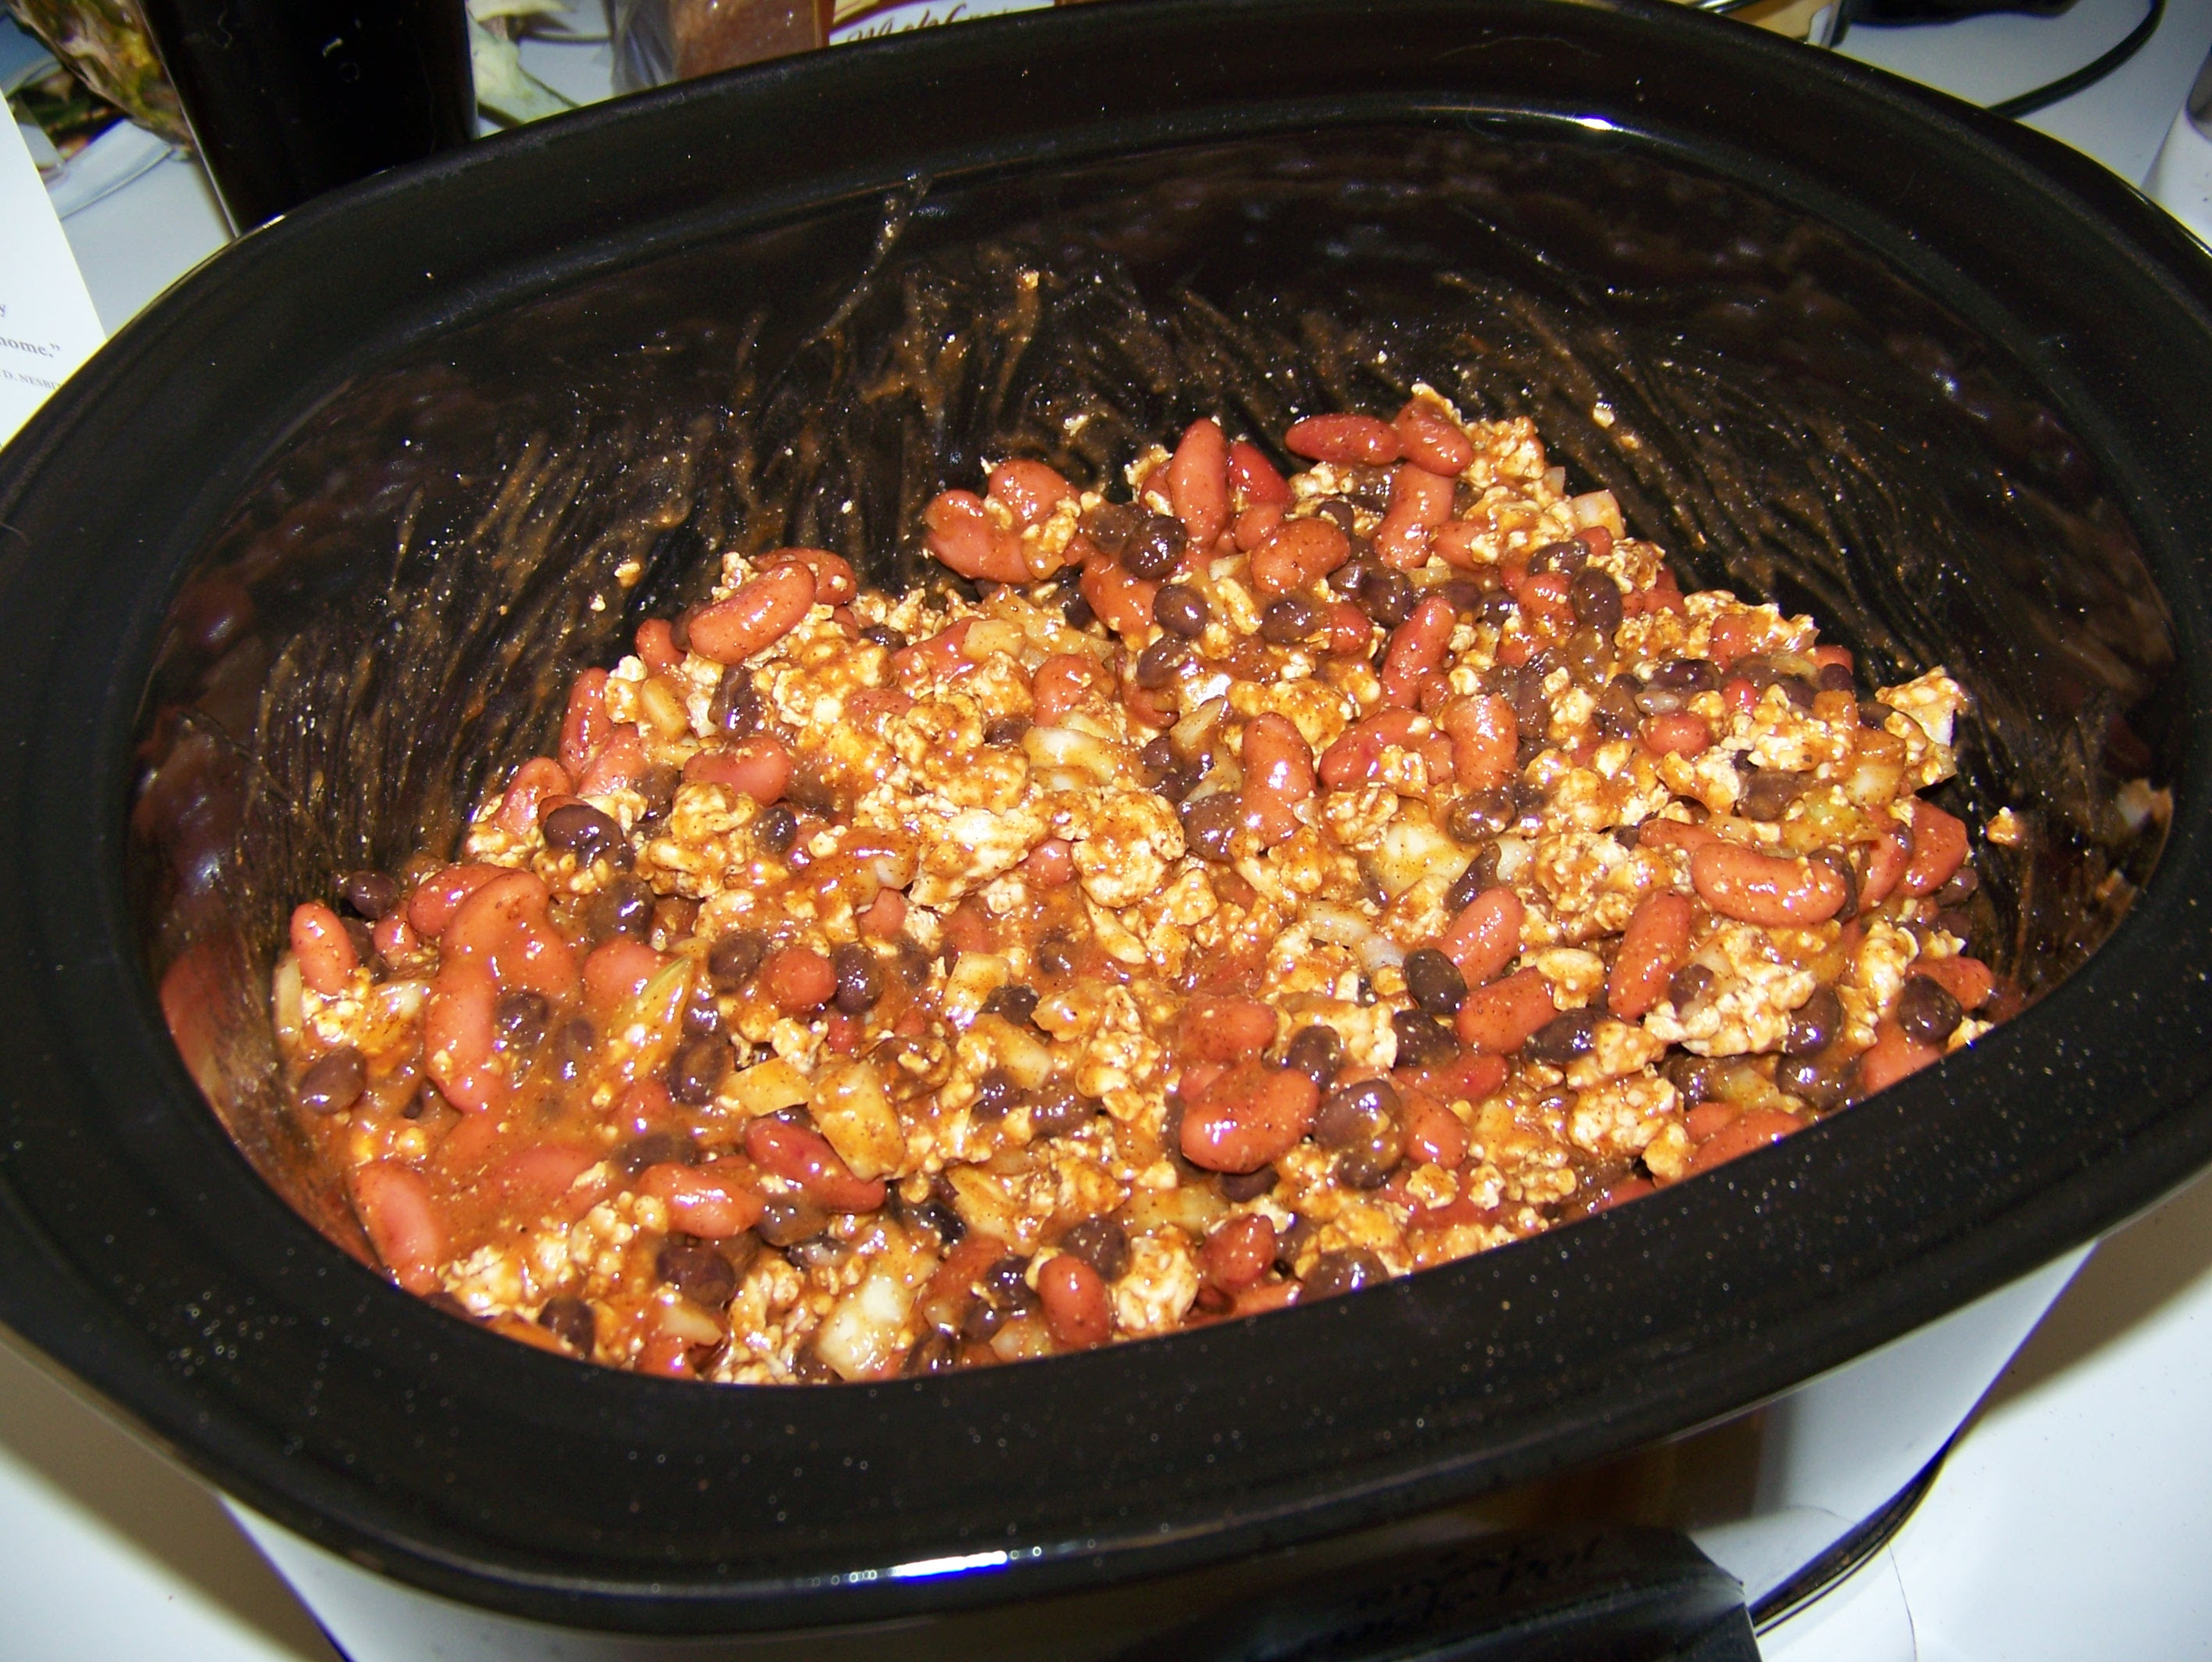 Chili Recipe Crock Pot Easy Beef with Beans Vegetarian Photos Pics ...